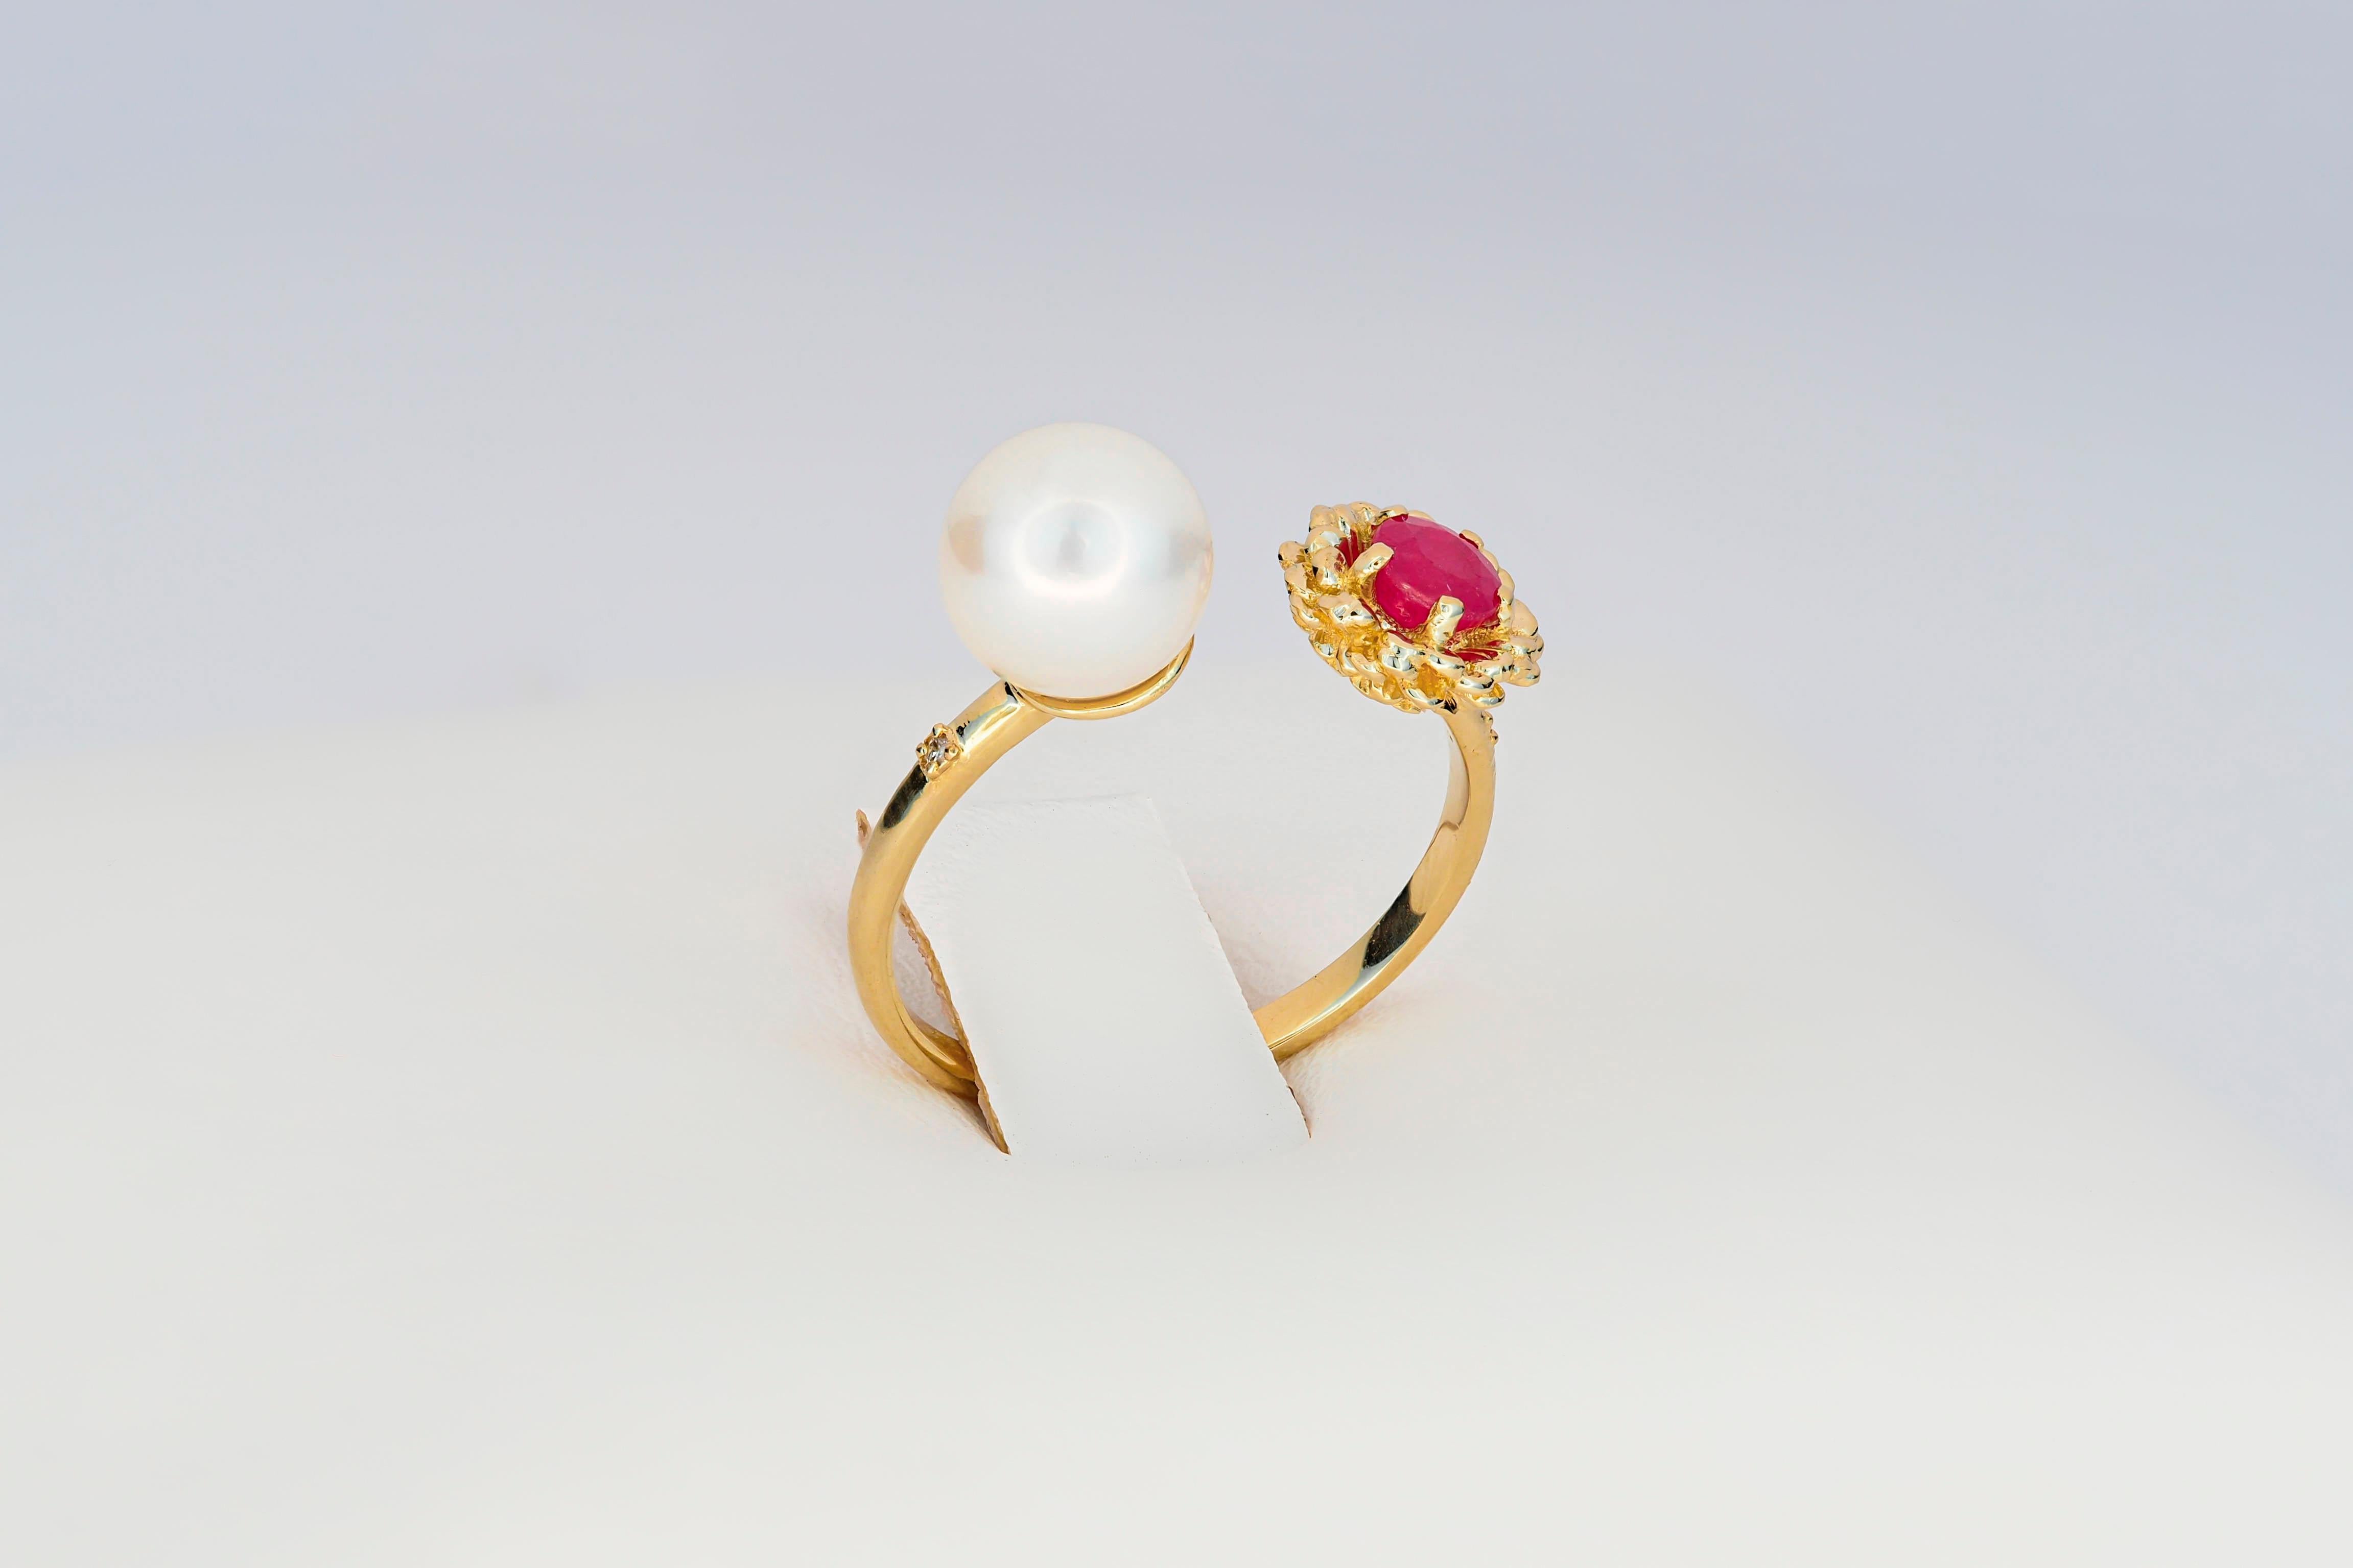 For Sale:  14k Gold Ring with Ruby, Pearl and Diamond, Flower Ring 8